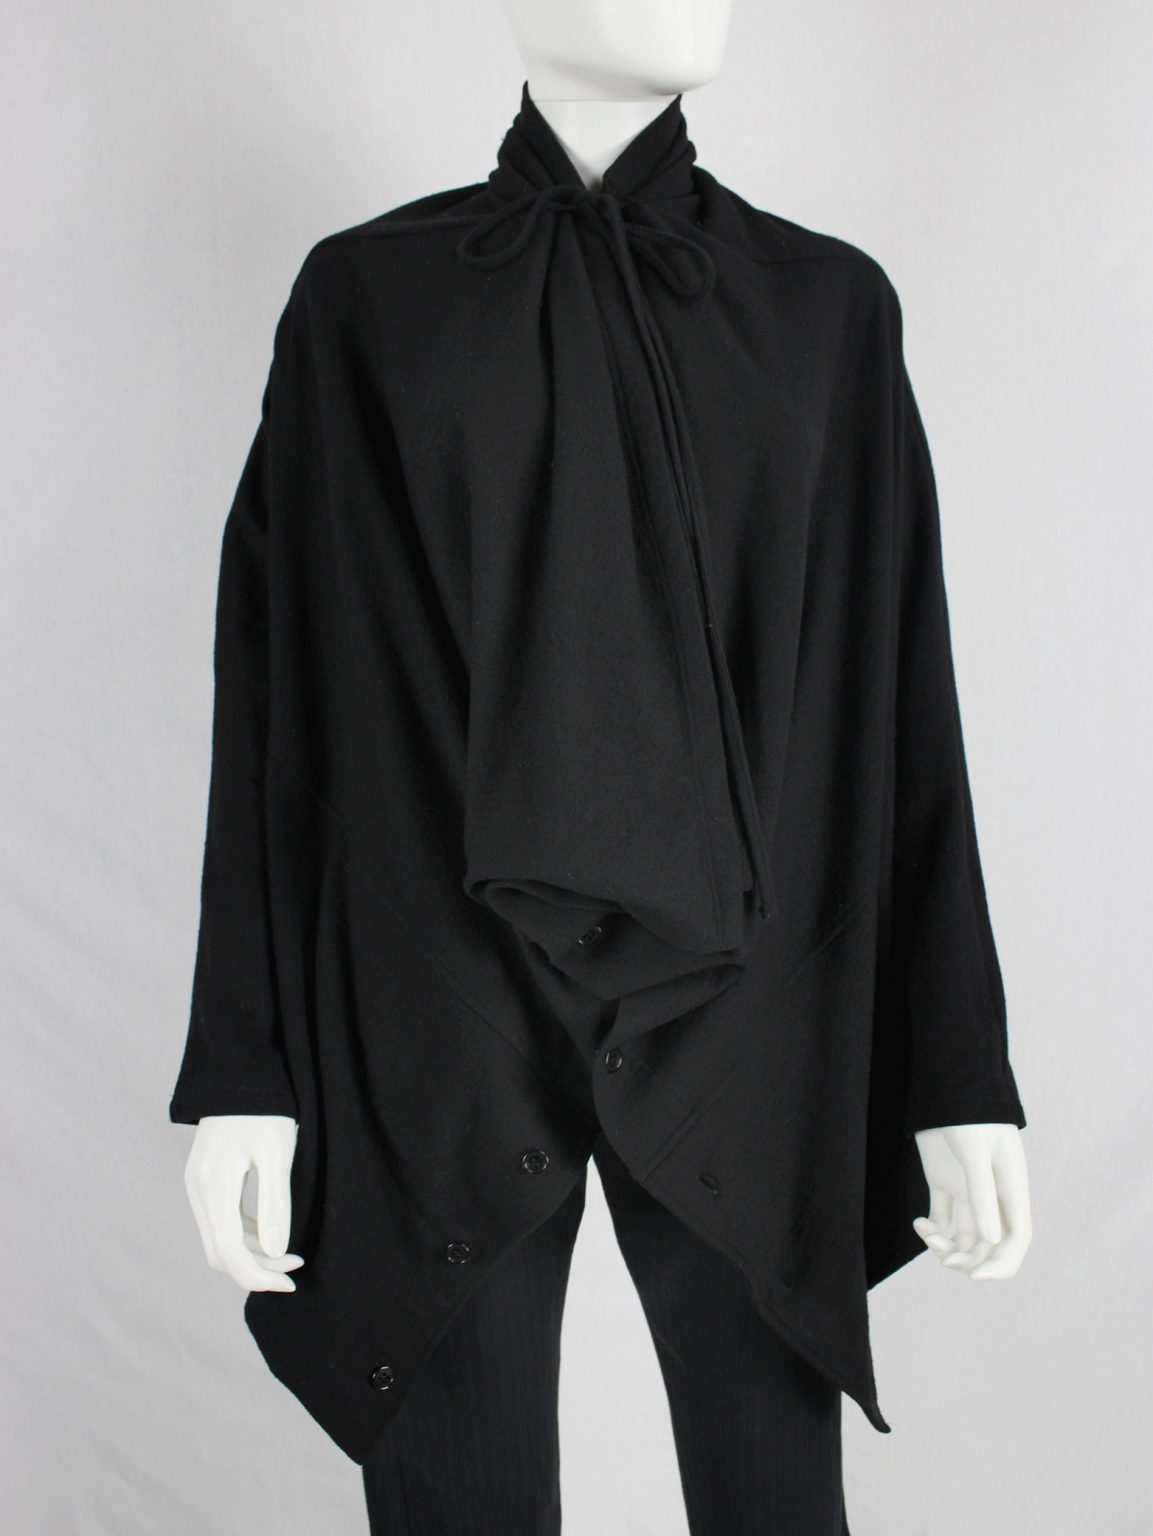 Ann Demeulemeester black draped button-up jumper with oversized cowl neck